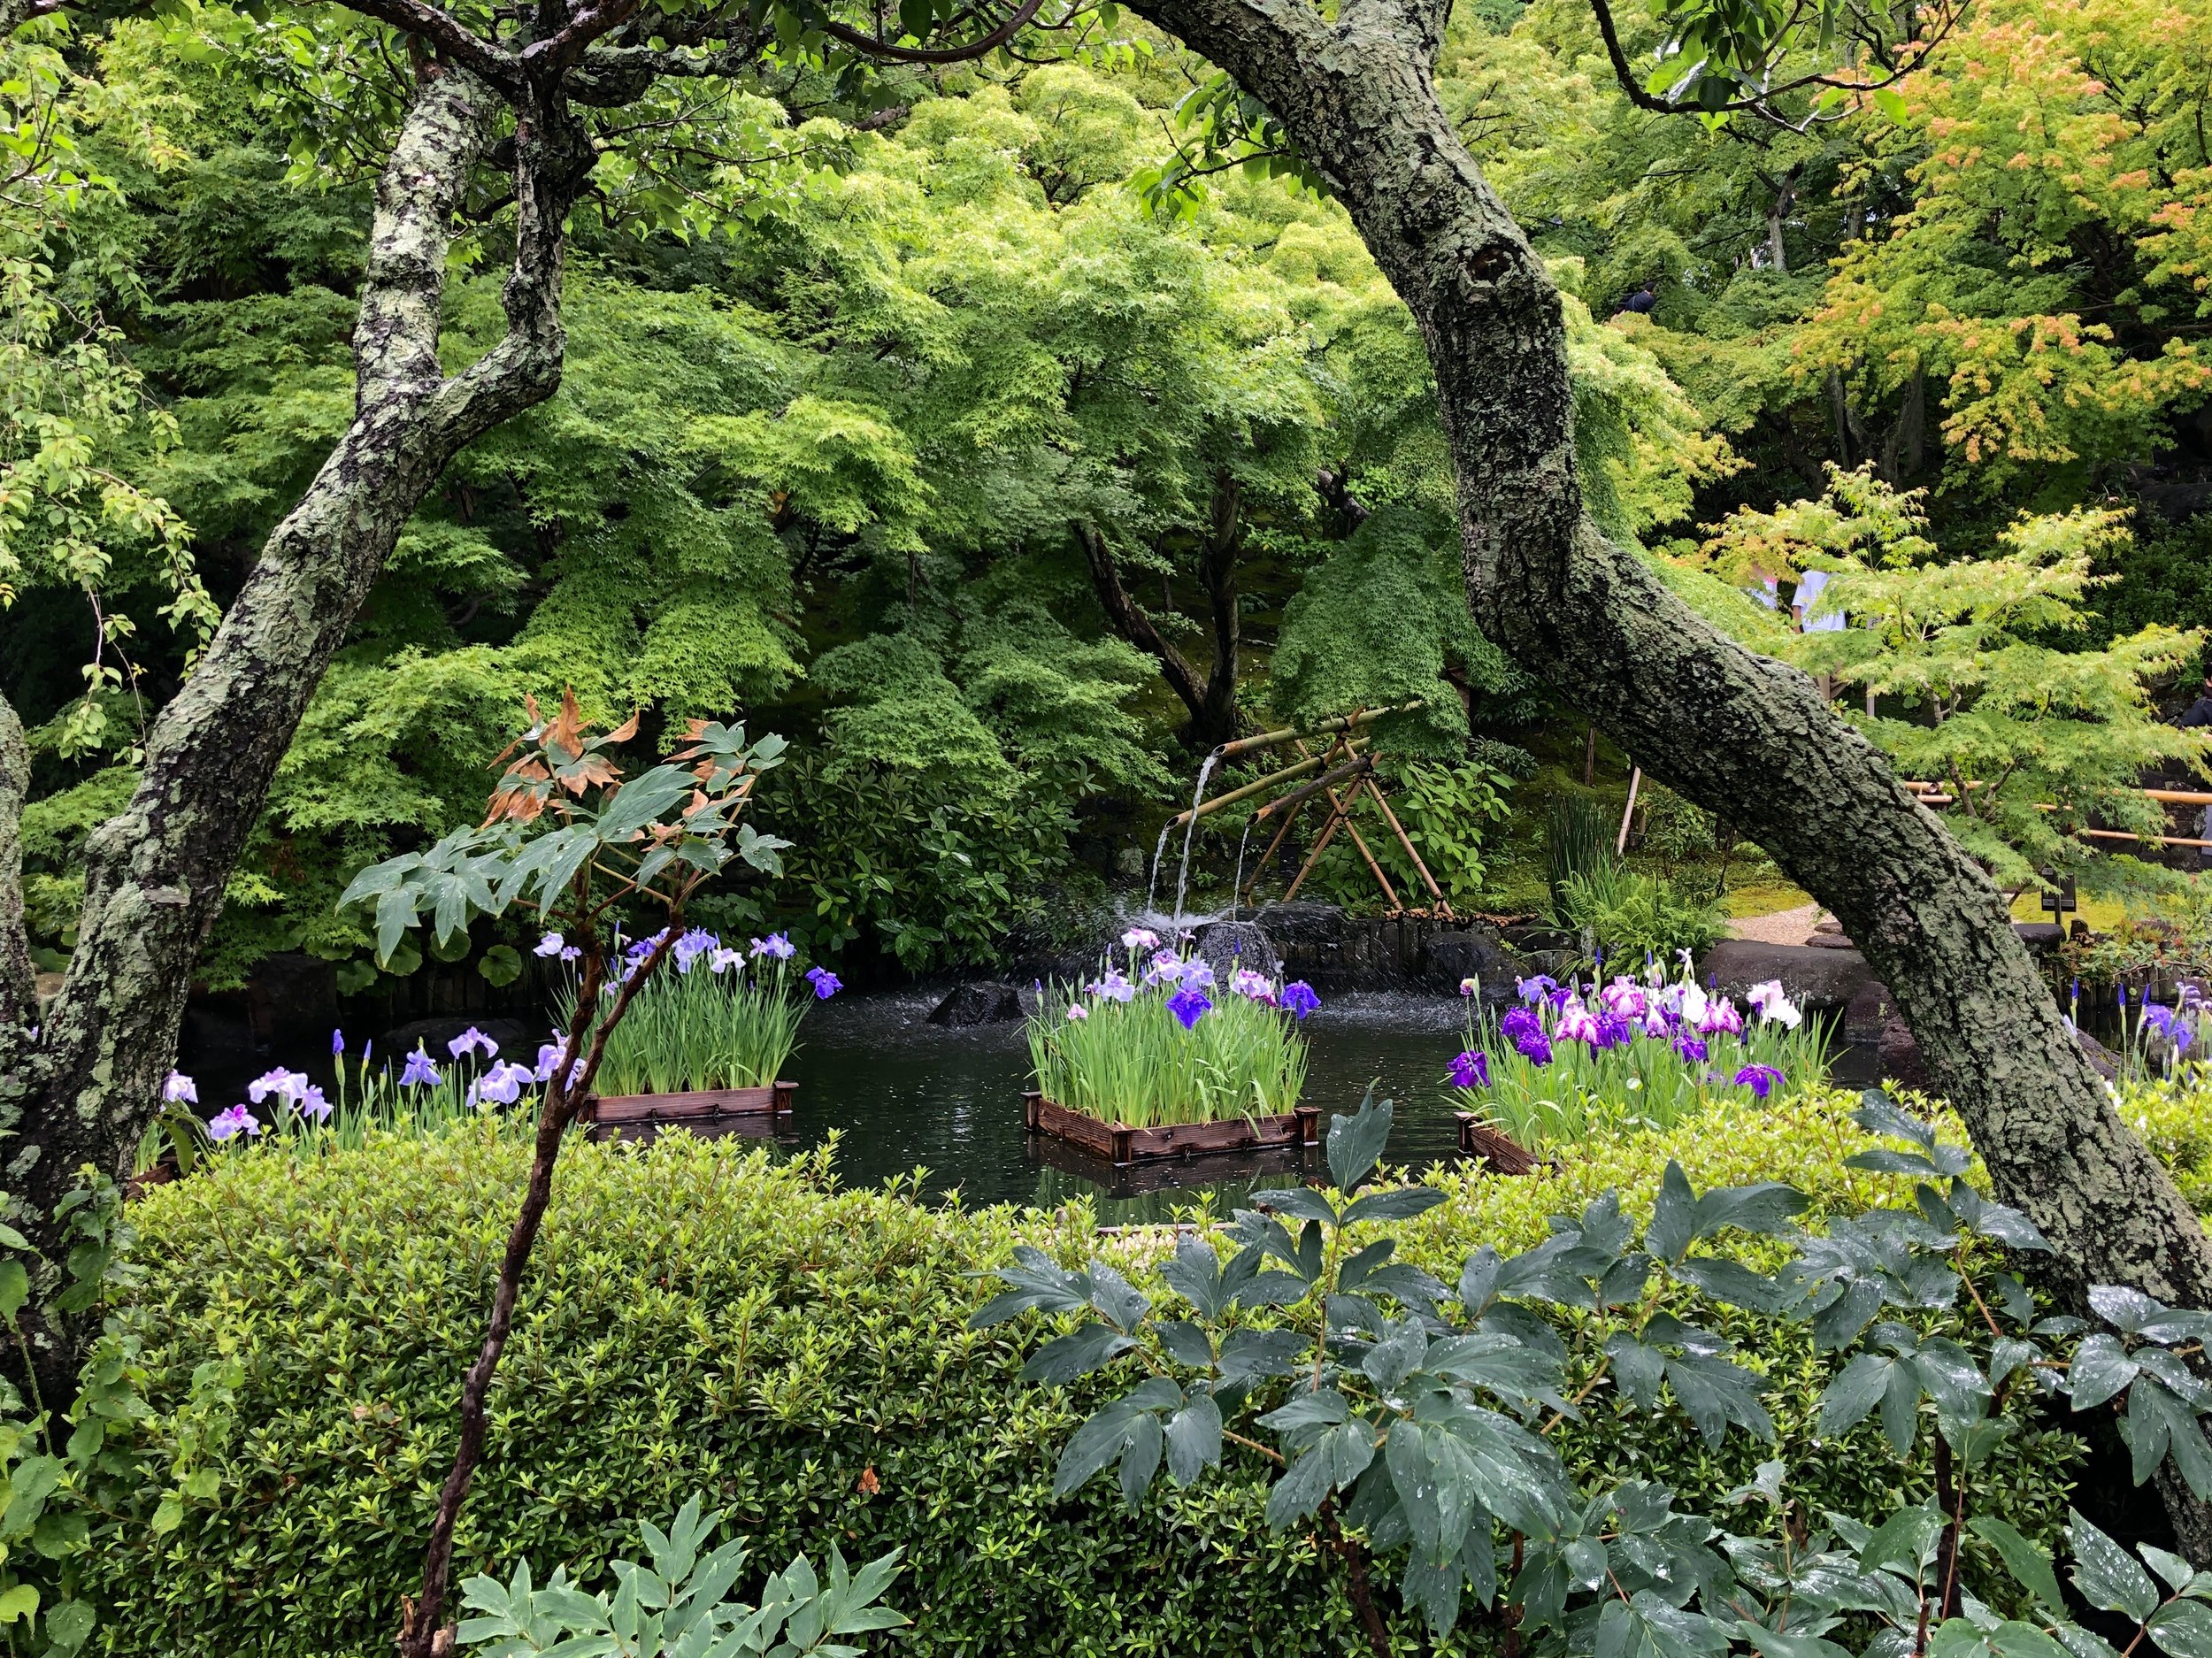 I visited this garden during the time of the irises. Blooms are used to mark moments in time.